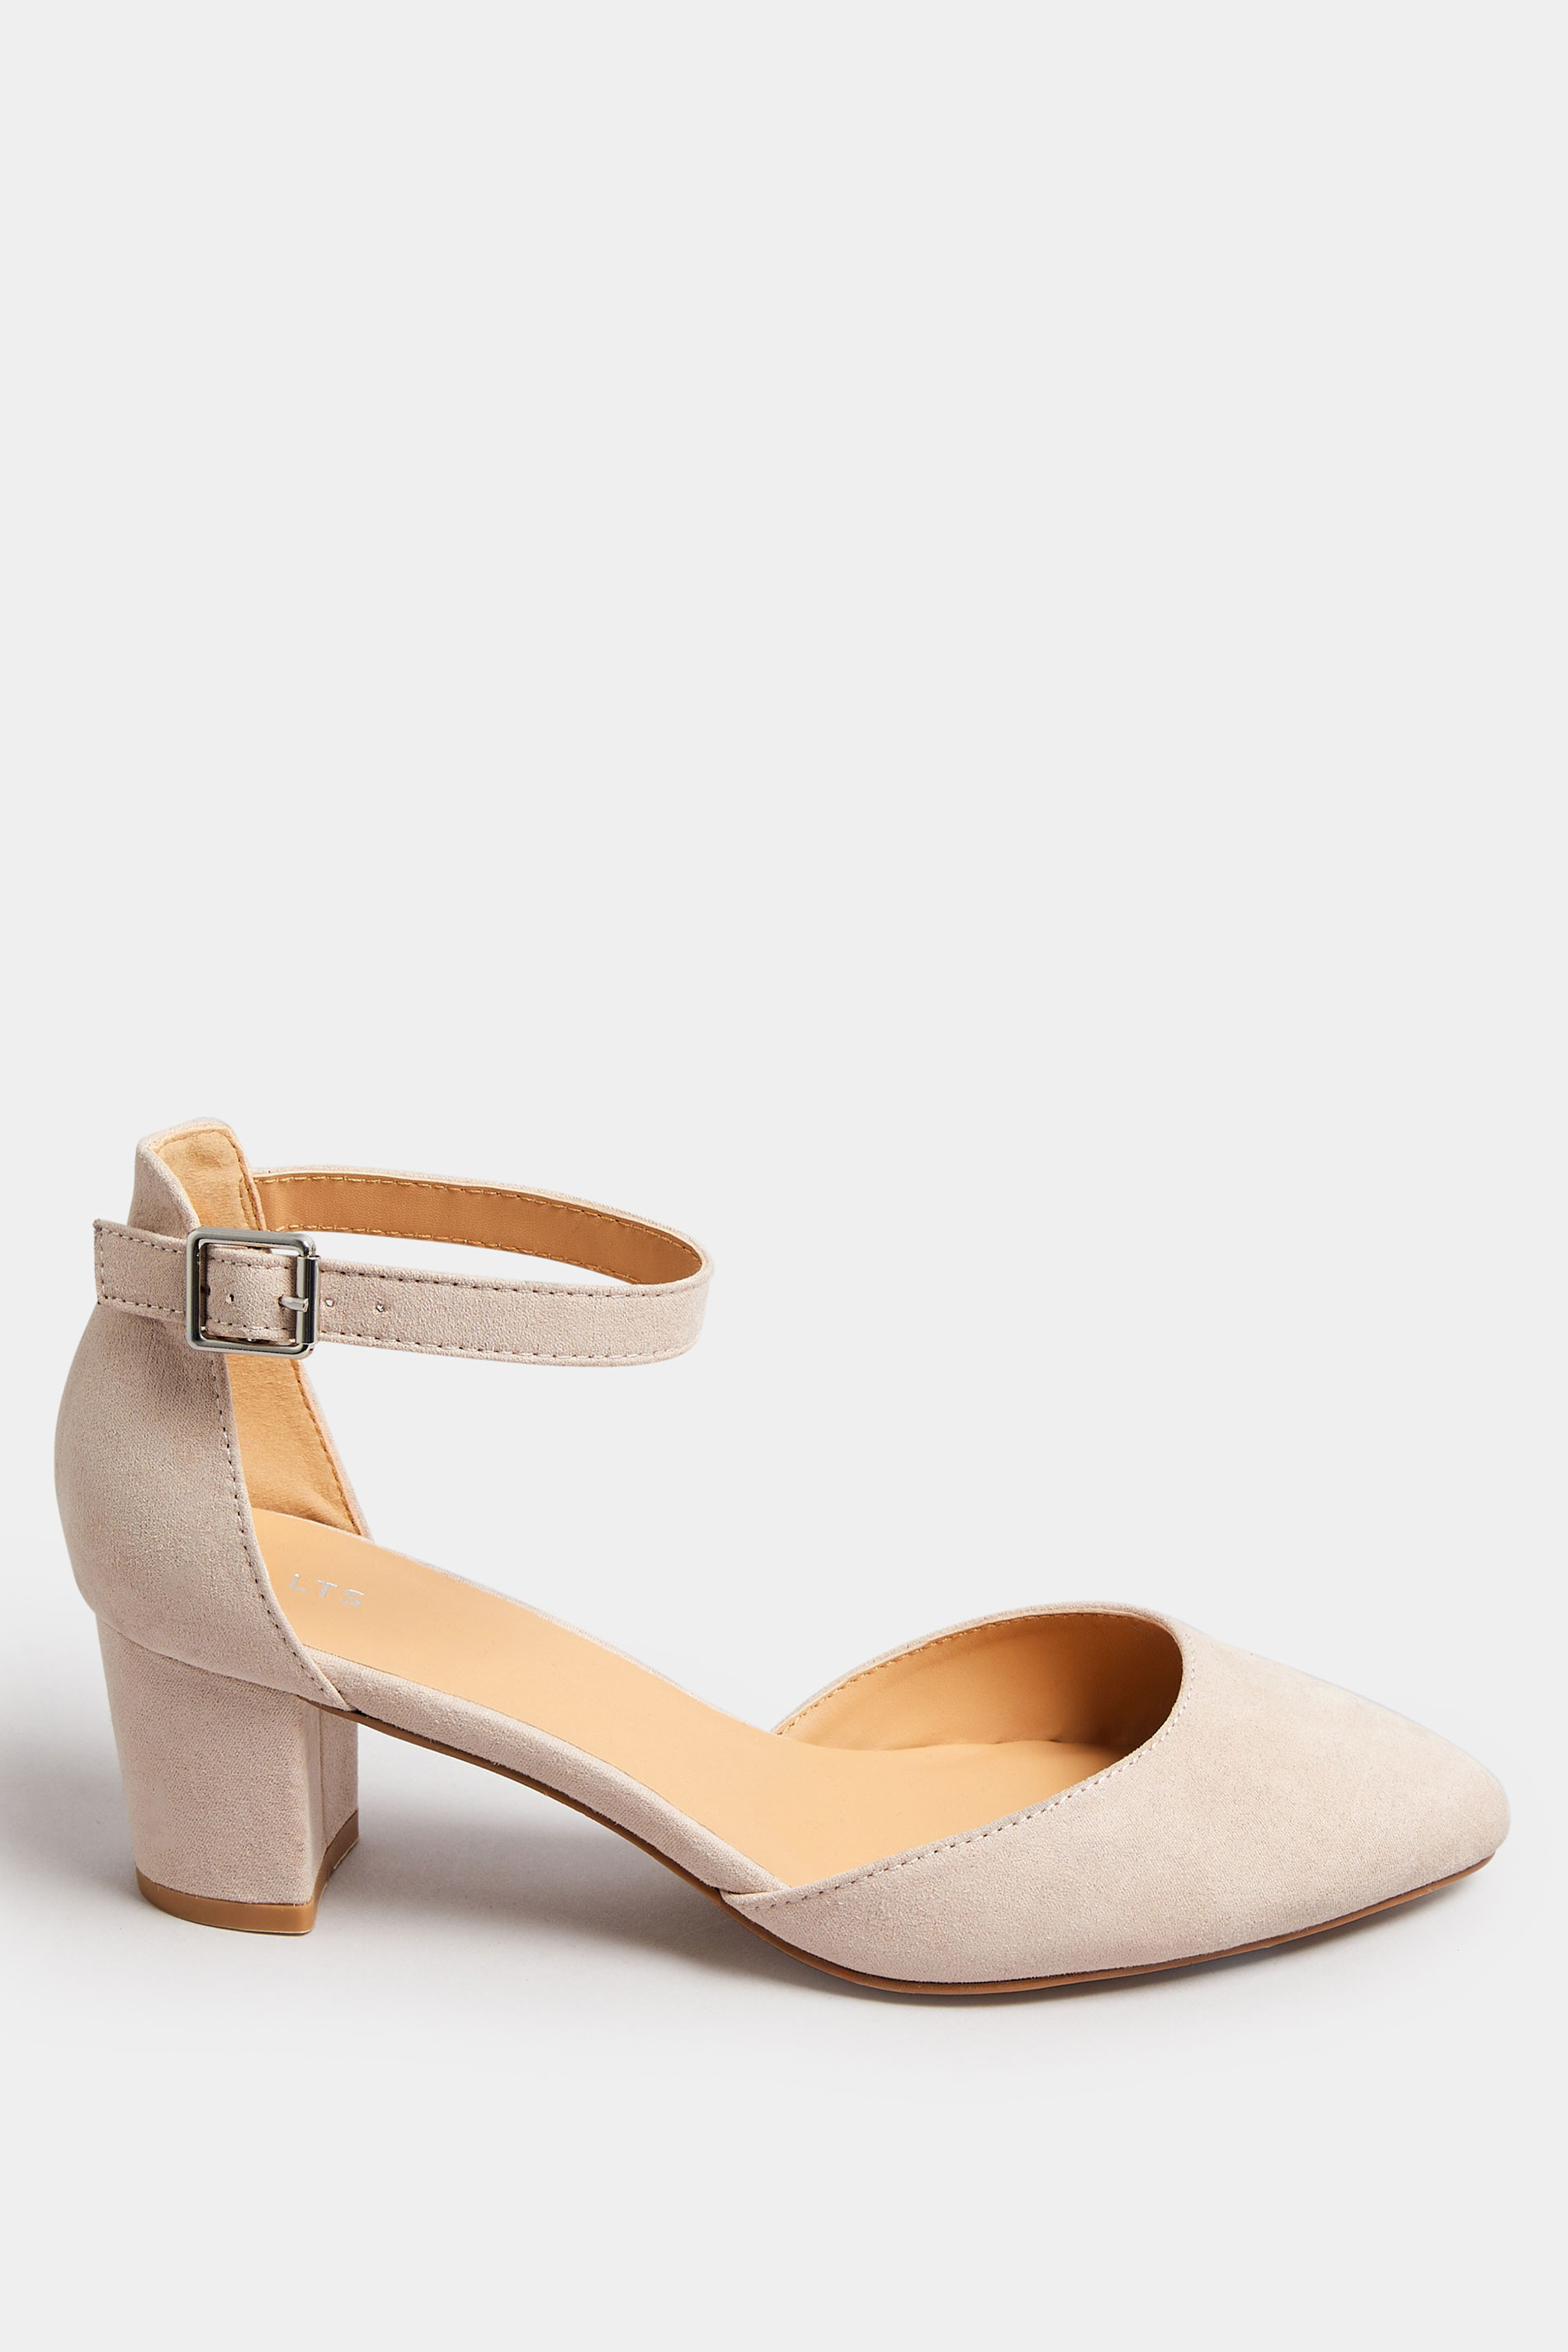 LTS Nude Block Heel Court Shoes In Standard Fit | Long Tall Sally 3